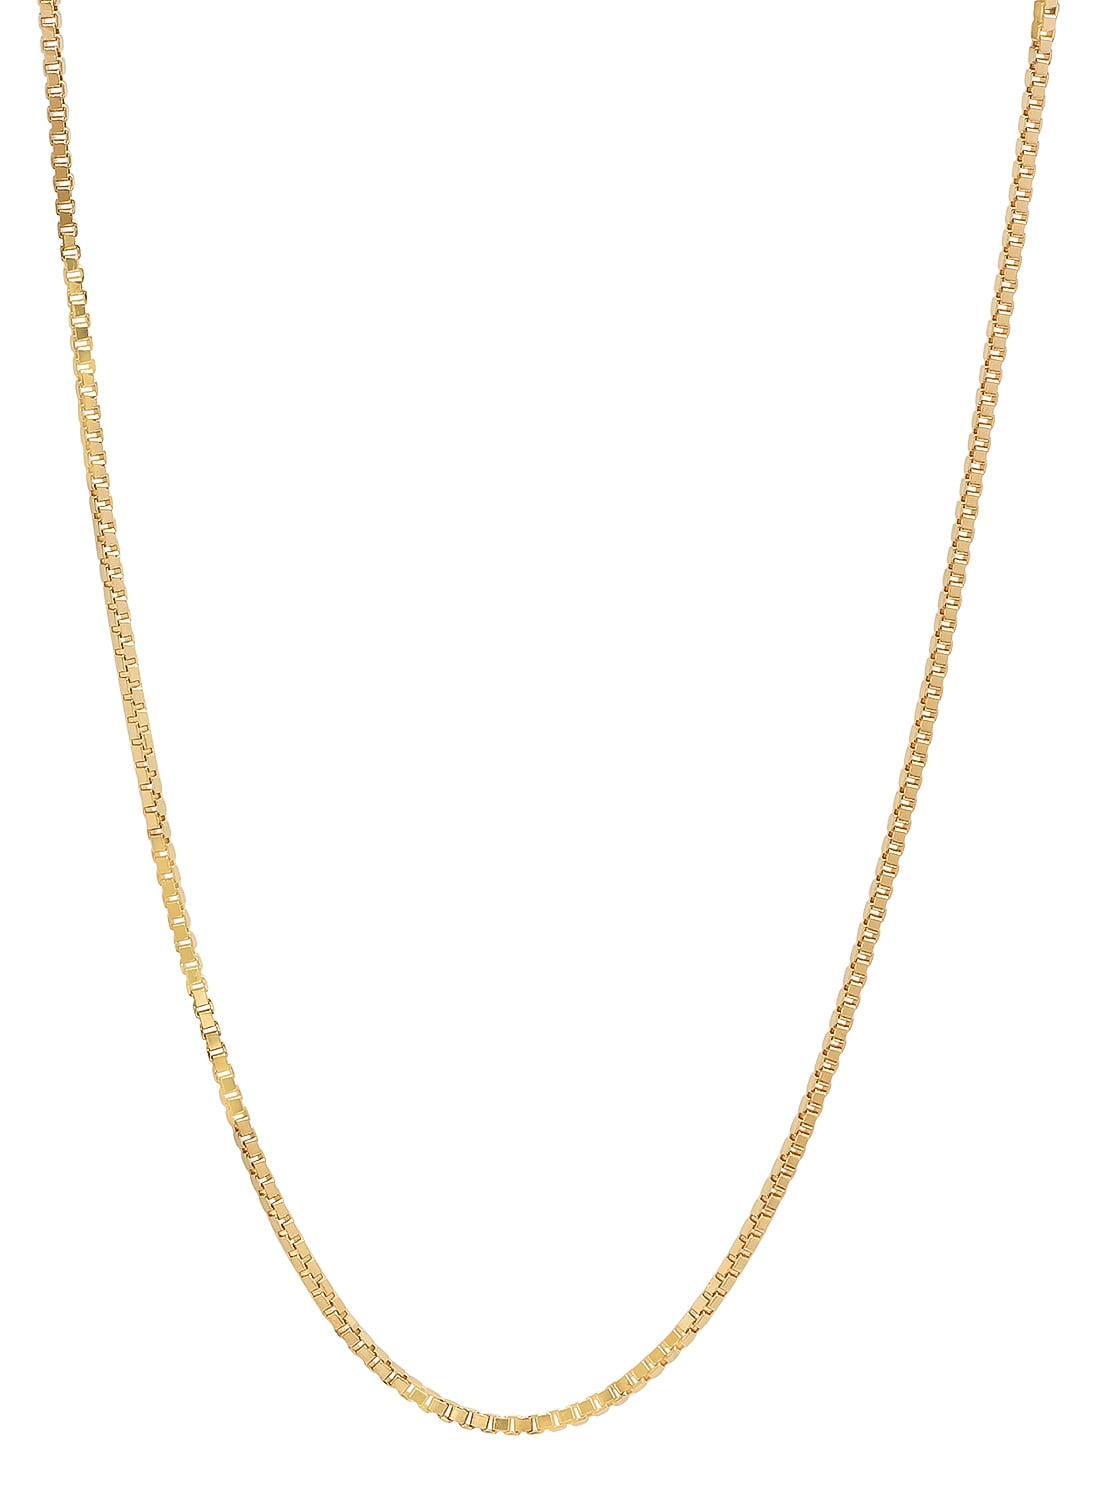 Gold Plated Box Chain 1.9mm New Solid Square Link Necklace 